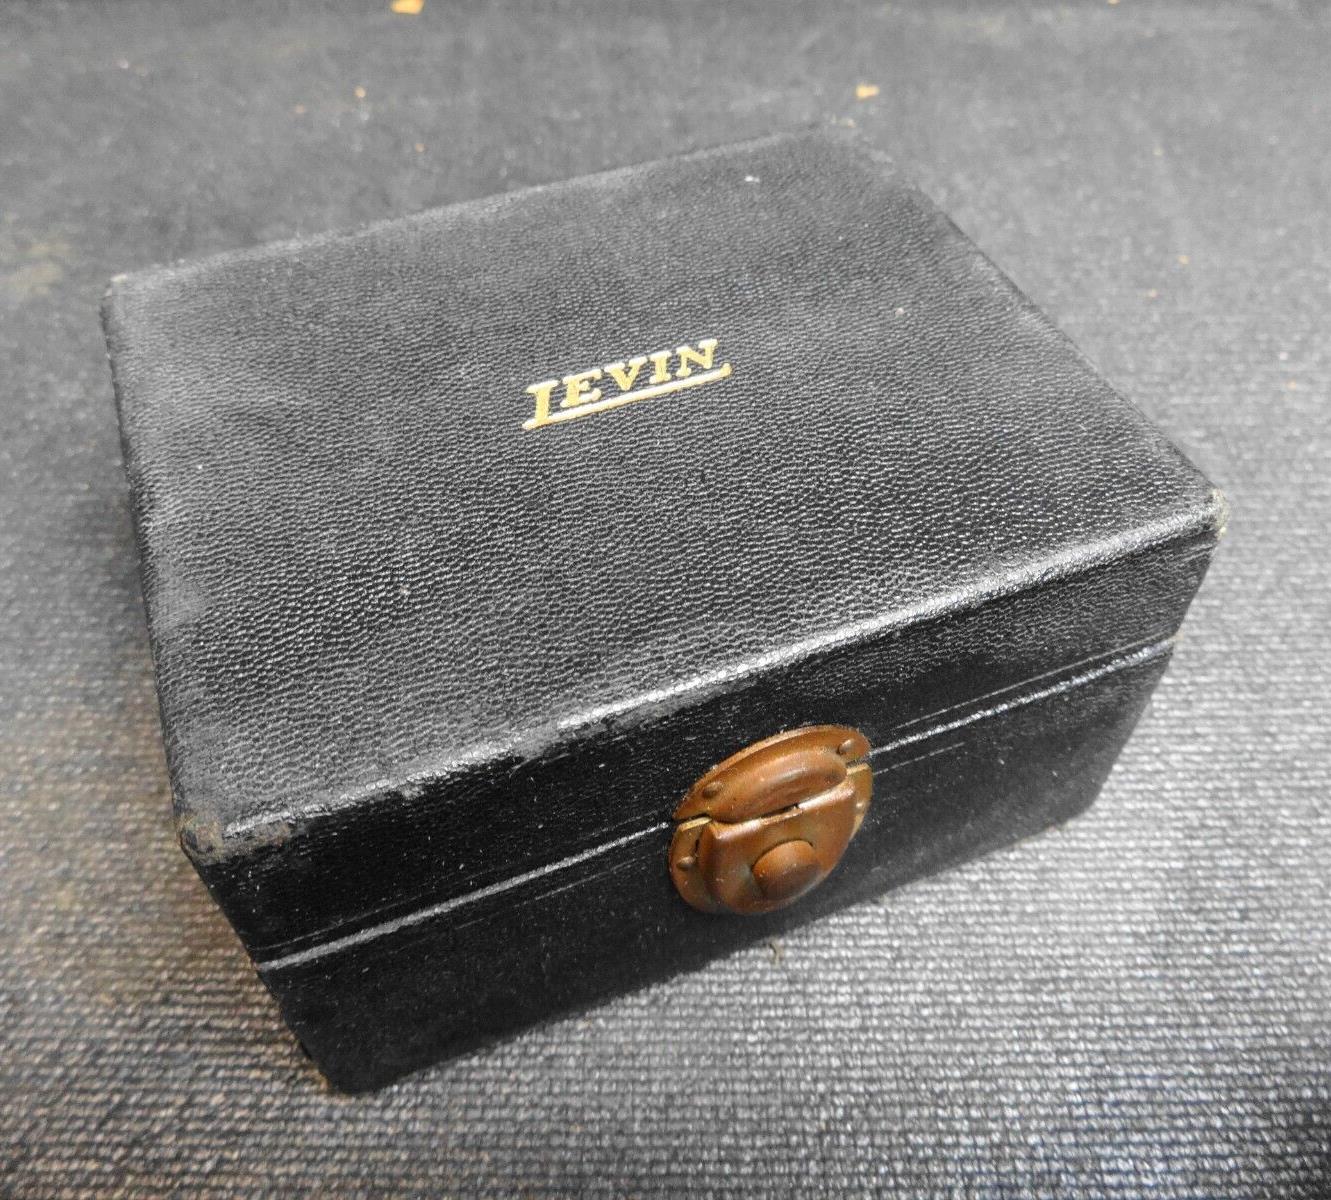 Levin Jeweler Posing Vise Clamp Ruby Jaw Watchmakers Tool in Original Case